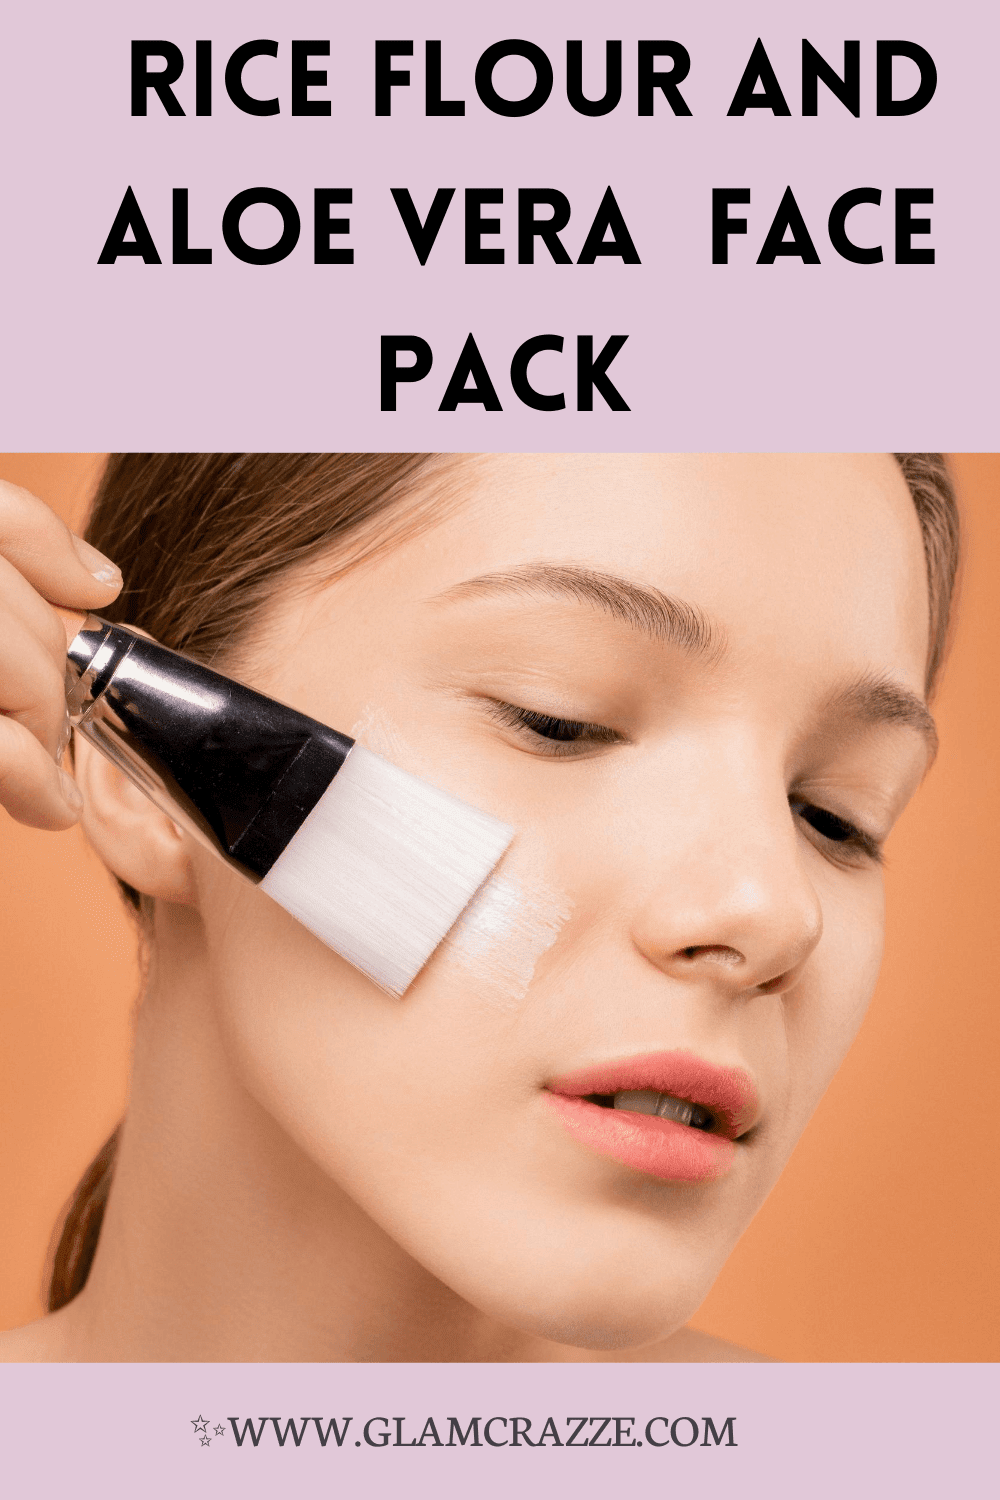 How to prepare rice flour and aloe Vera gel face pack for bright skin